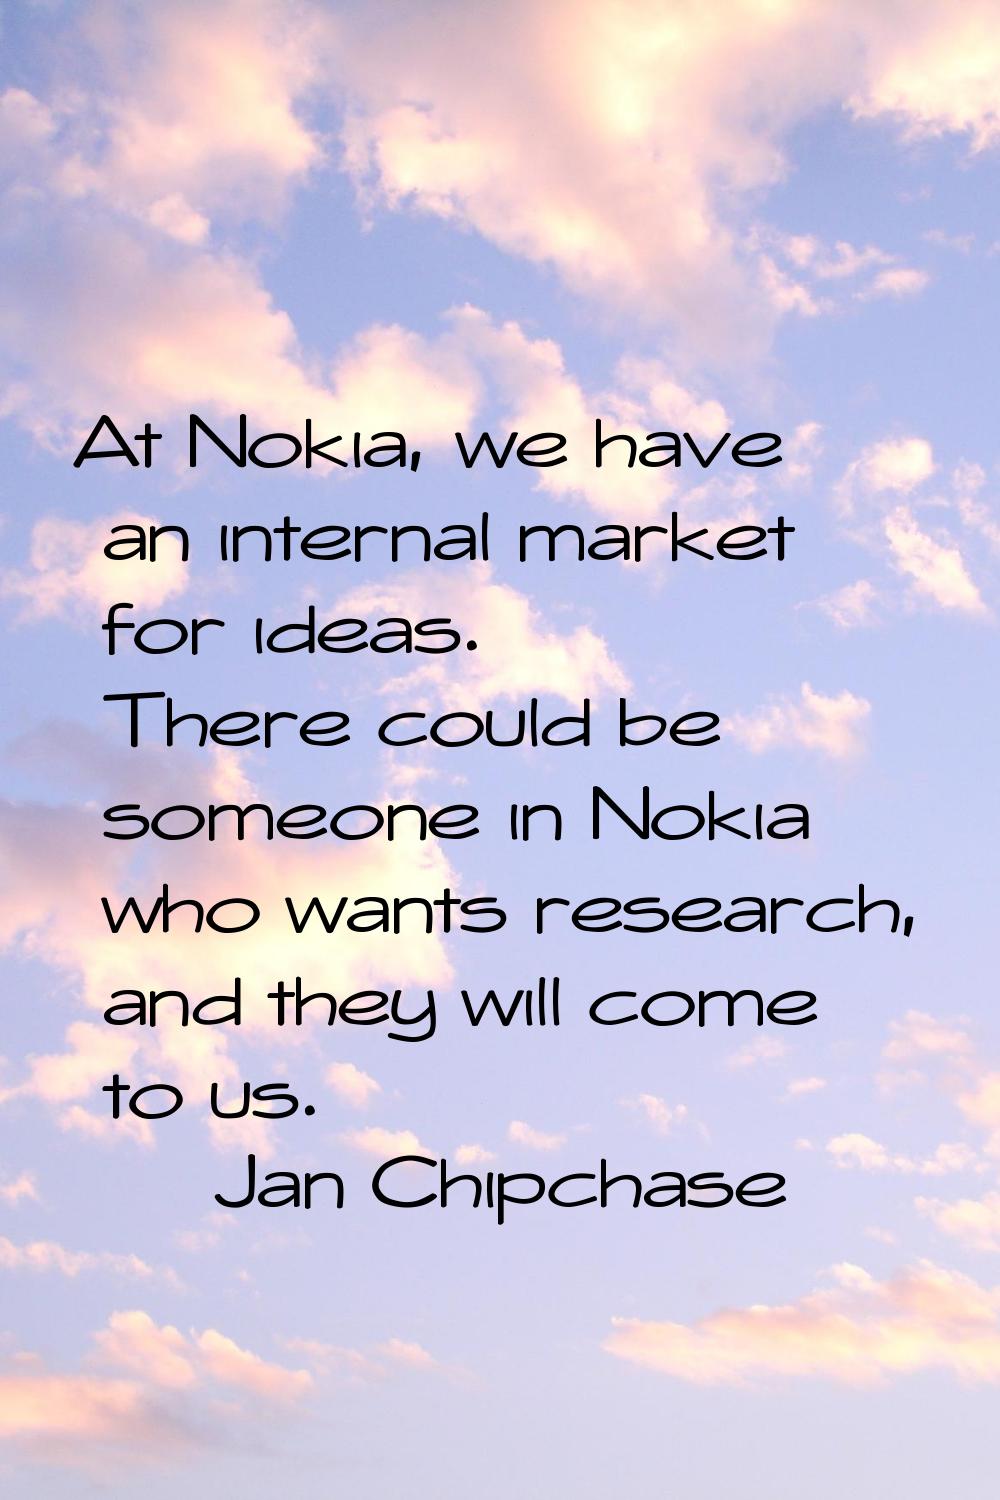 At Nokia, we have an internal market for ideas. There could be someone in Nokia who wants research,